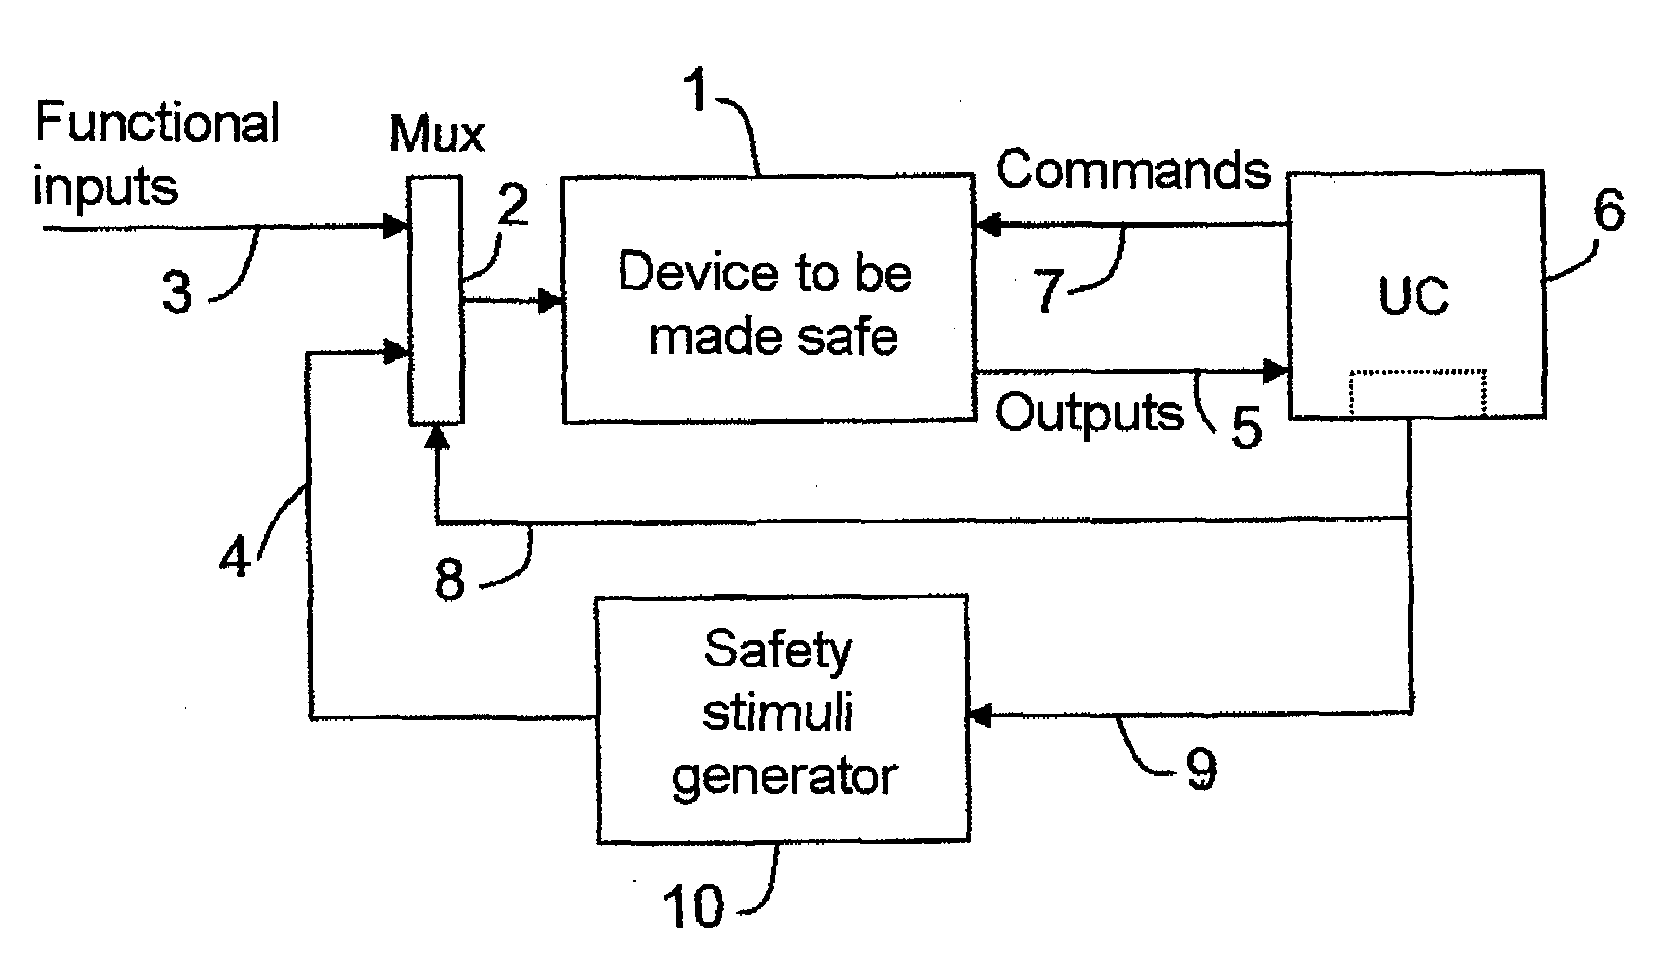 Method of improving the integrity and safety of an avionics system